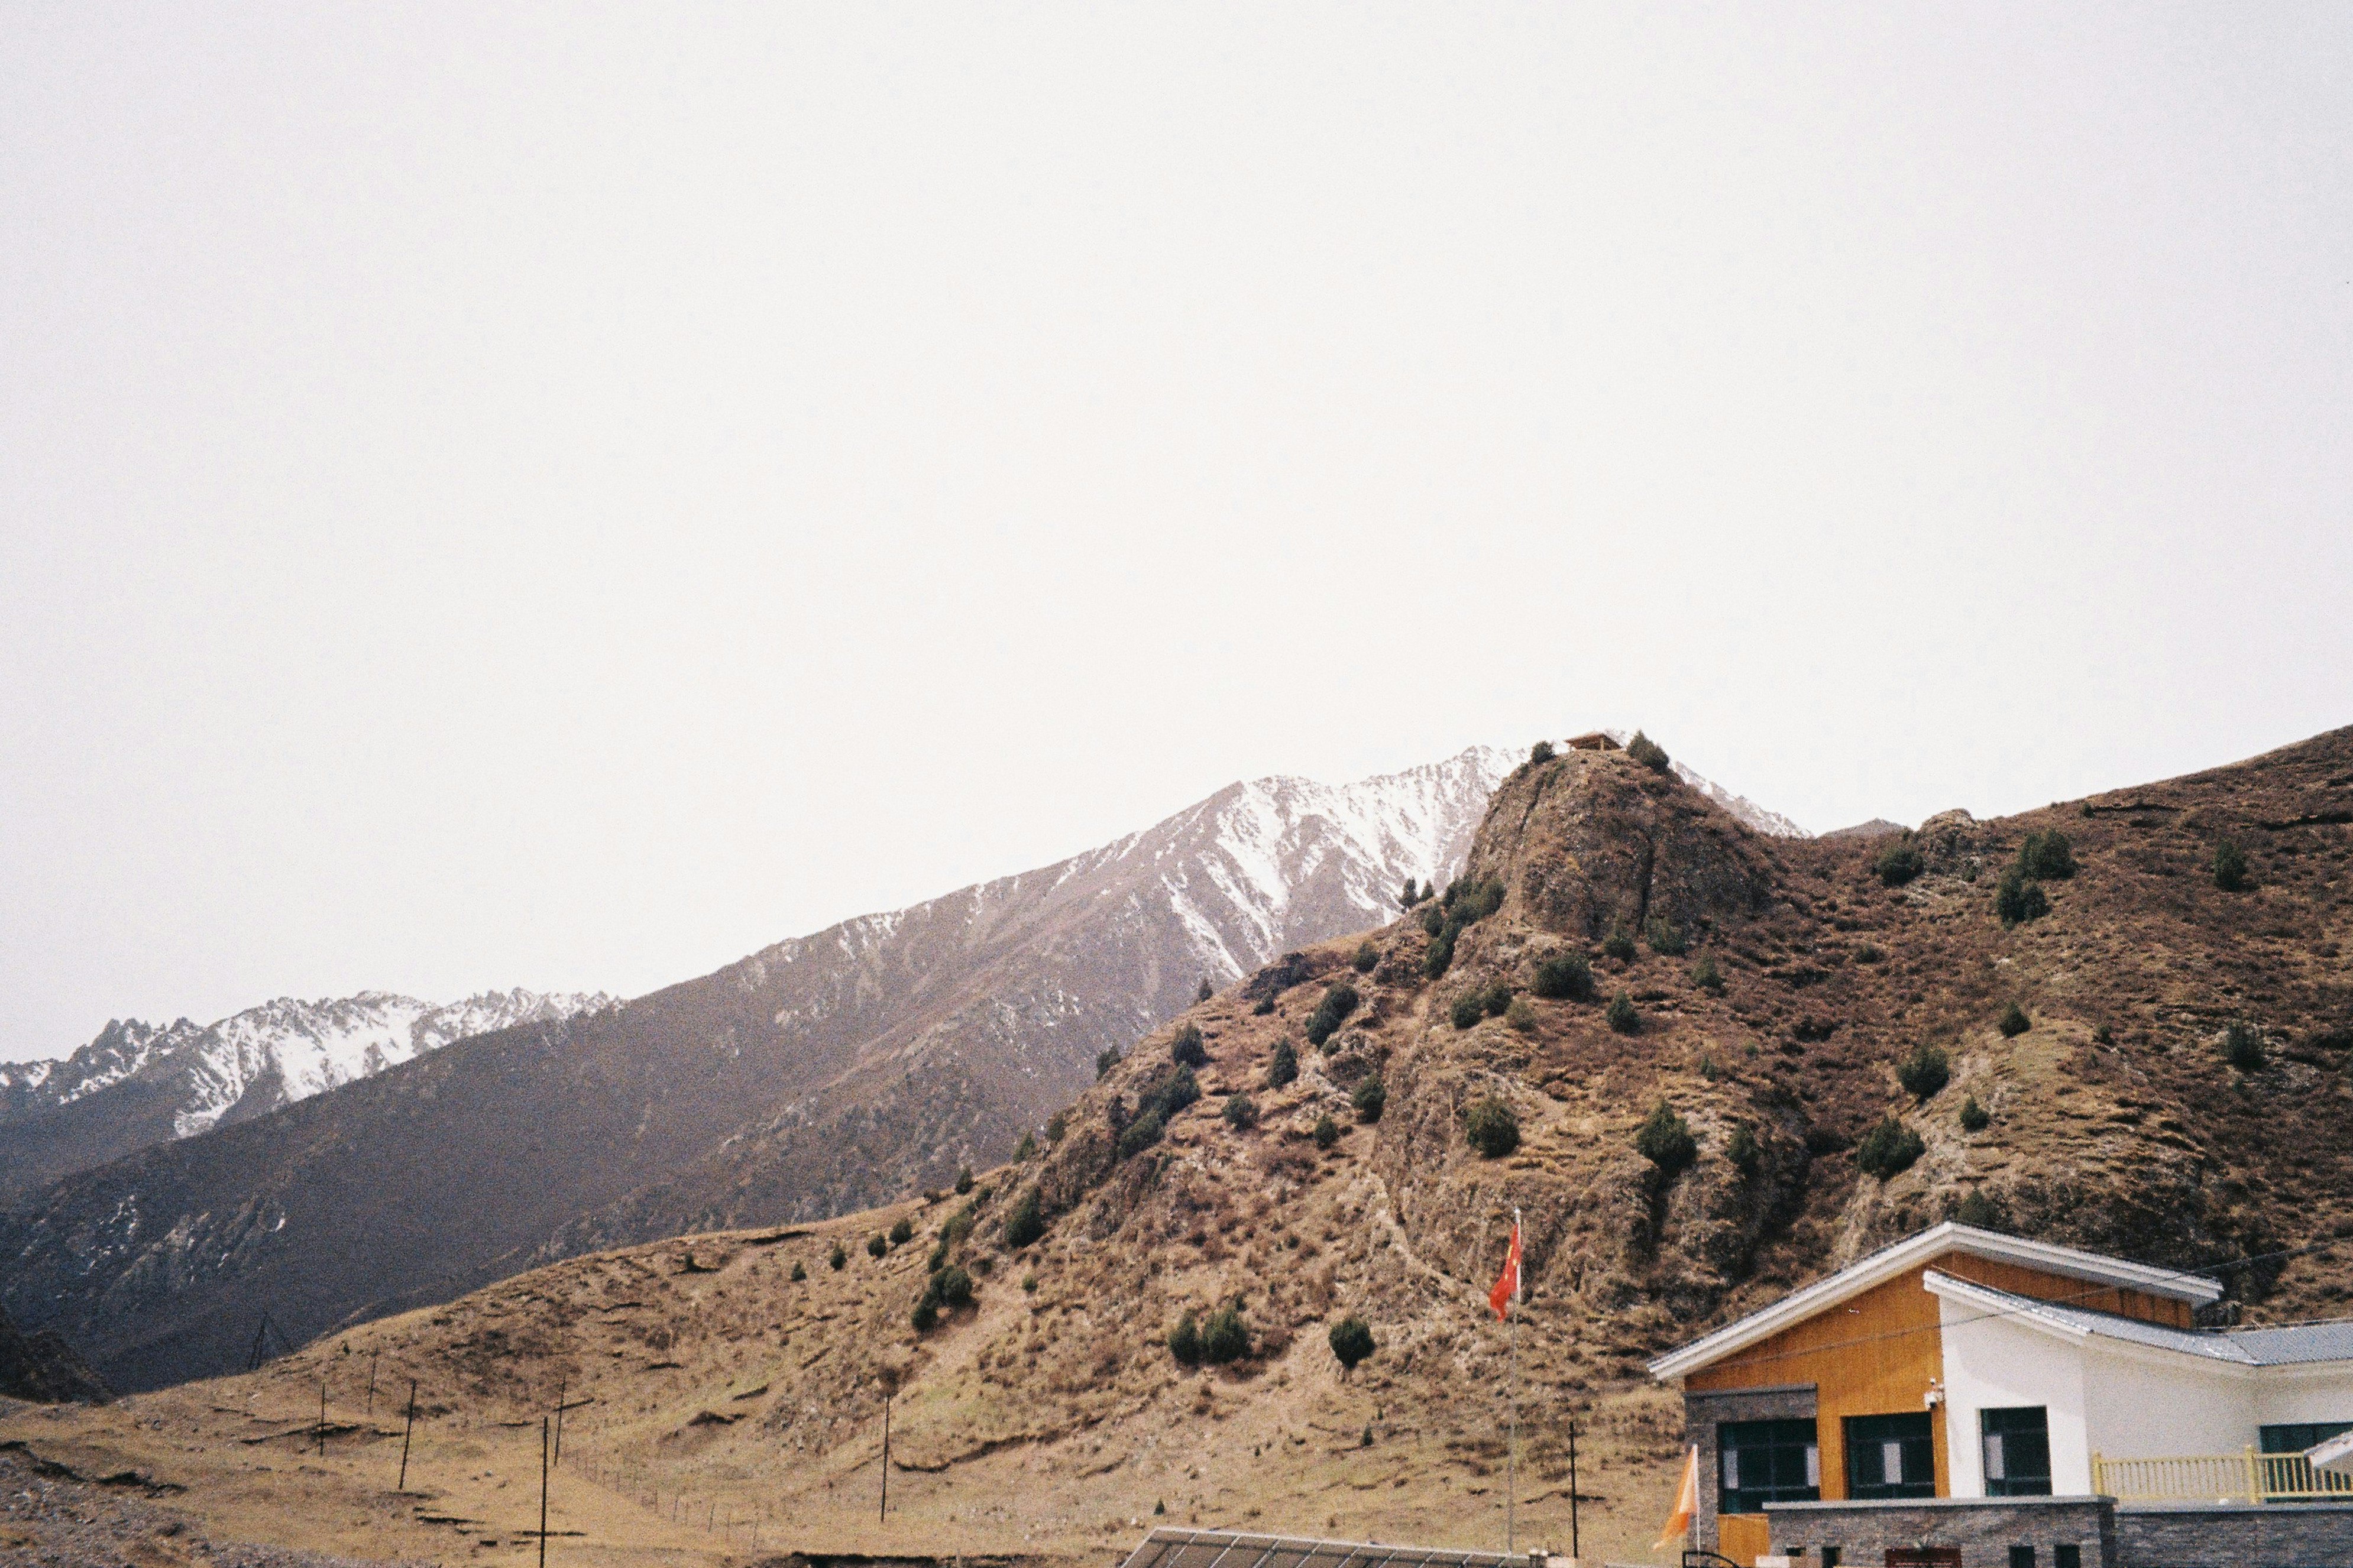 brown wooden house near snow covered mountain during daytime